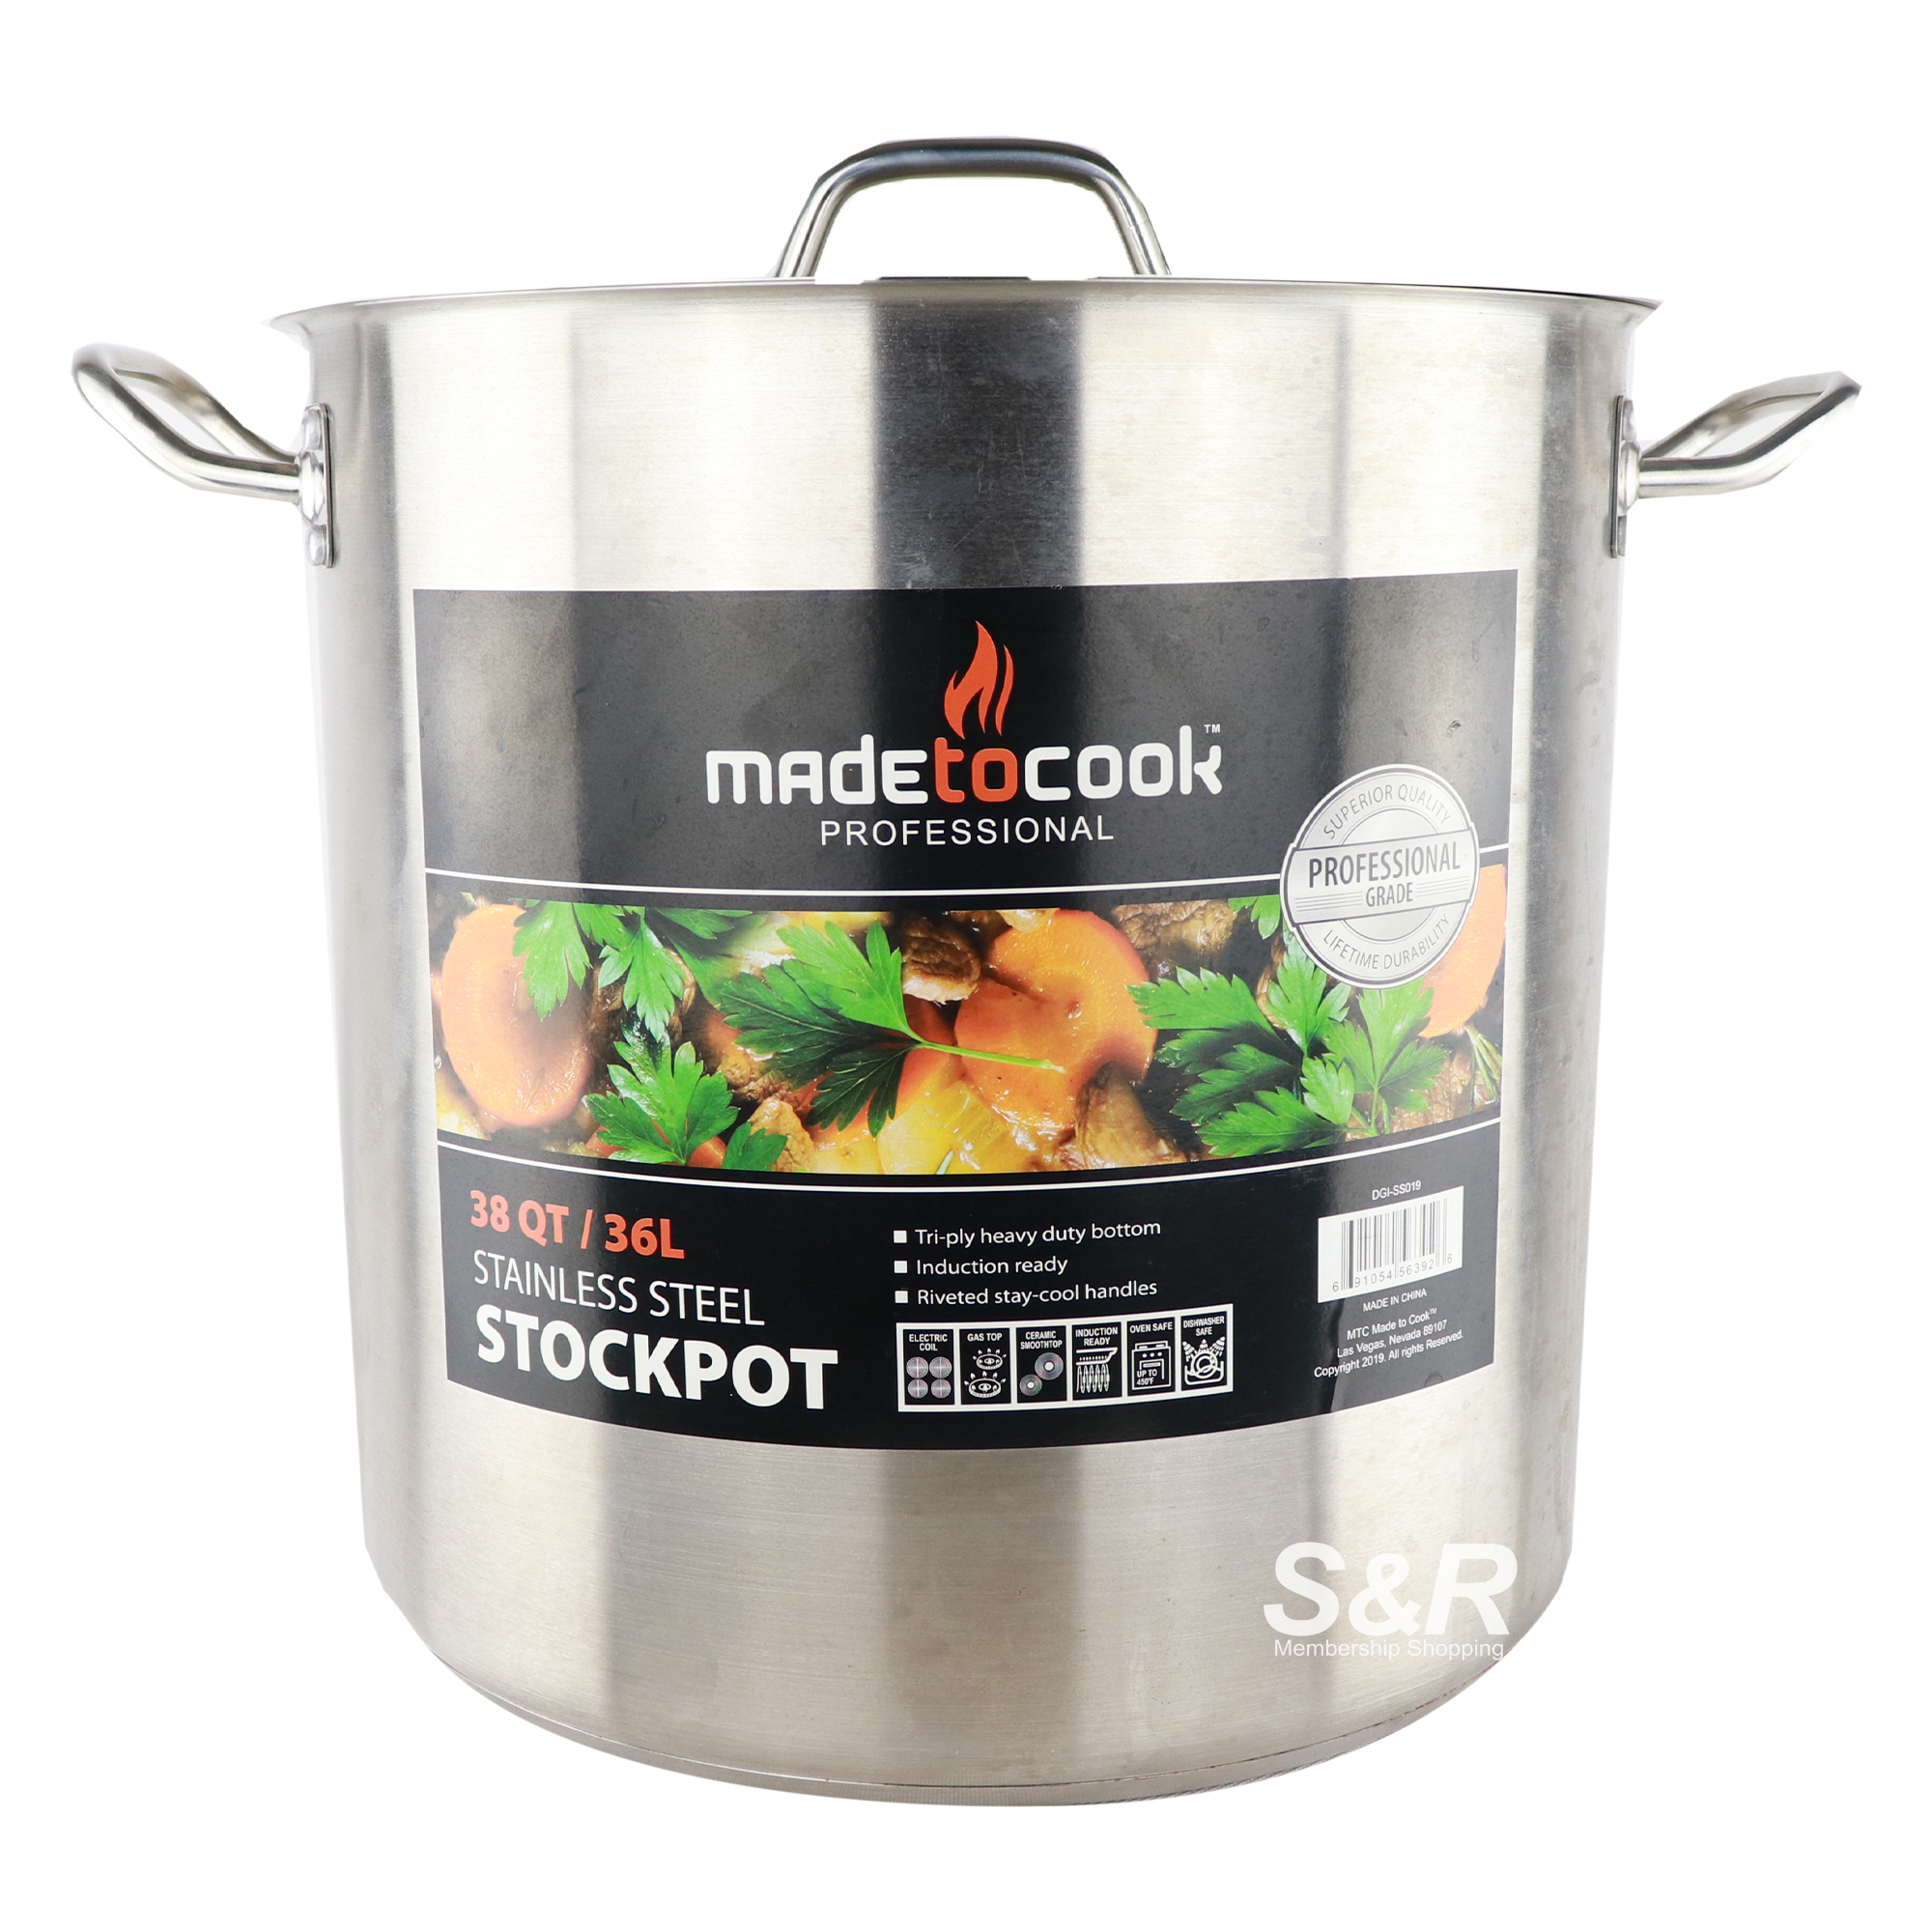 Made to Cook Professional Stainless Steel Stockpot 1pc